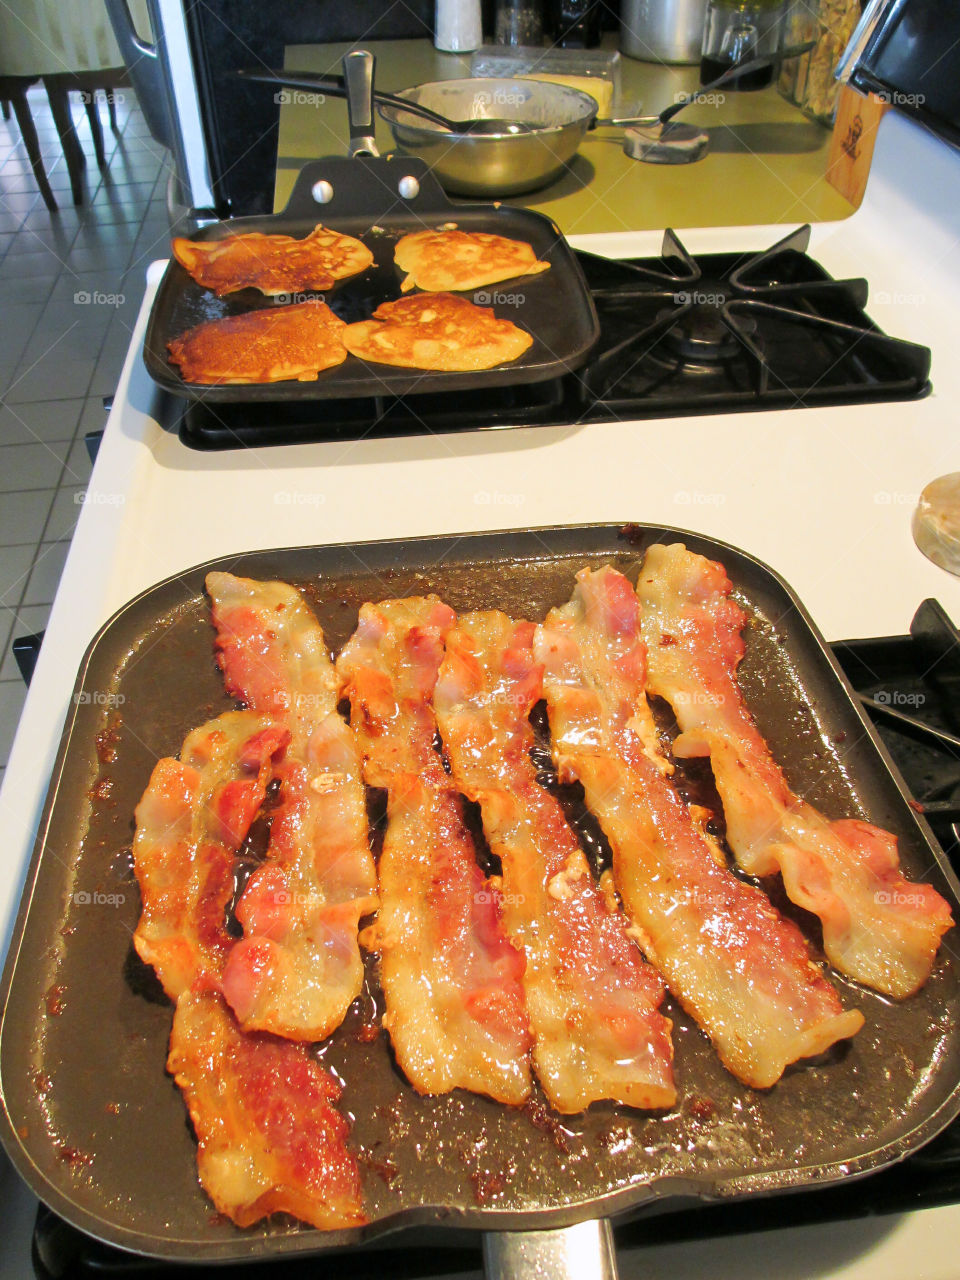 Breakfast is Cooking. Bacon and pancakes cooking on a stove top